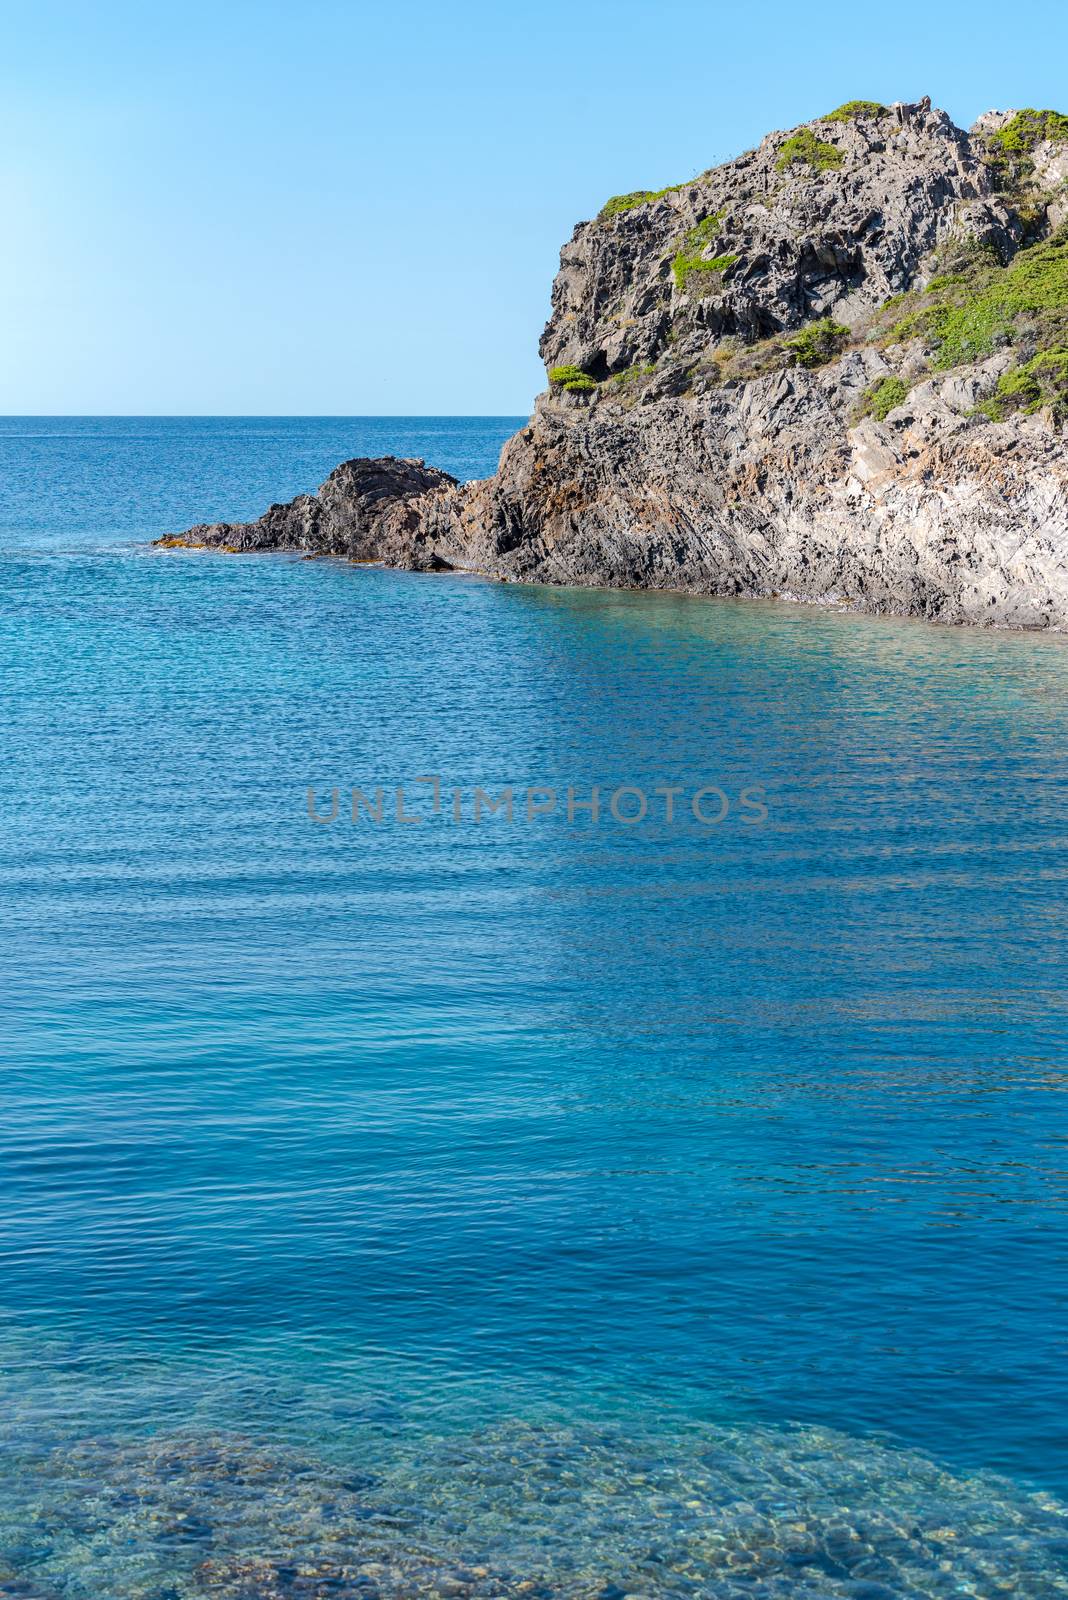 Sea landscape with Cap de Creus, natural park. Eastern point of Spain, Girona province, Catalonia. Famous tourist destination in Costa Brava. Sunny summer day with blue sky and clouds.